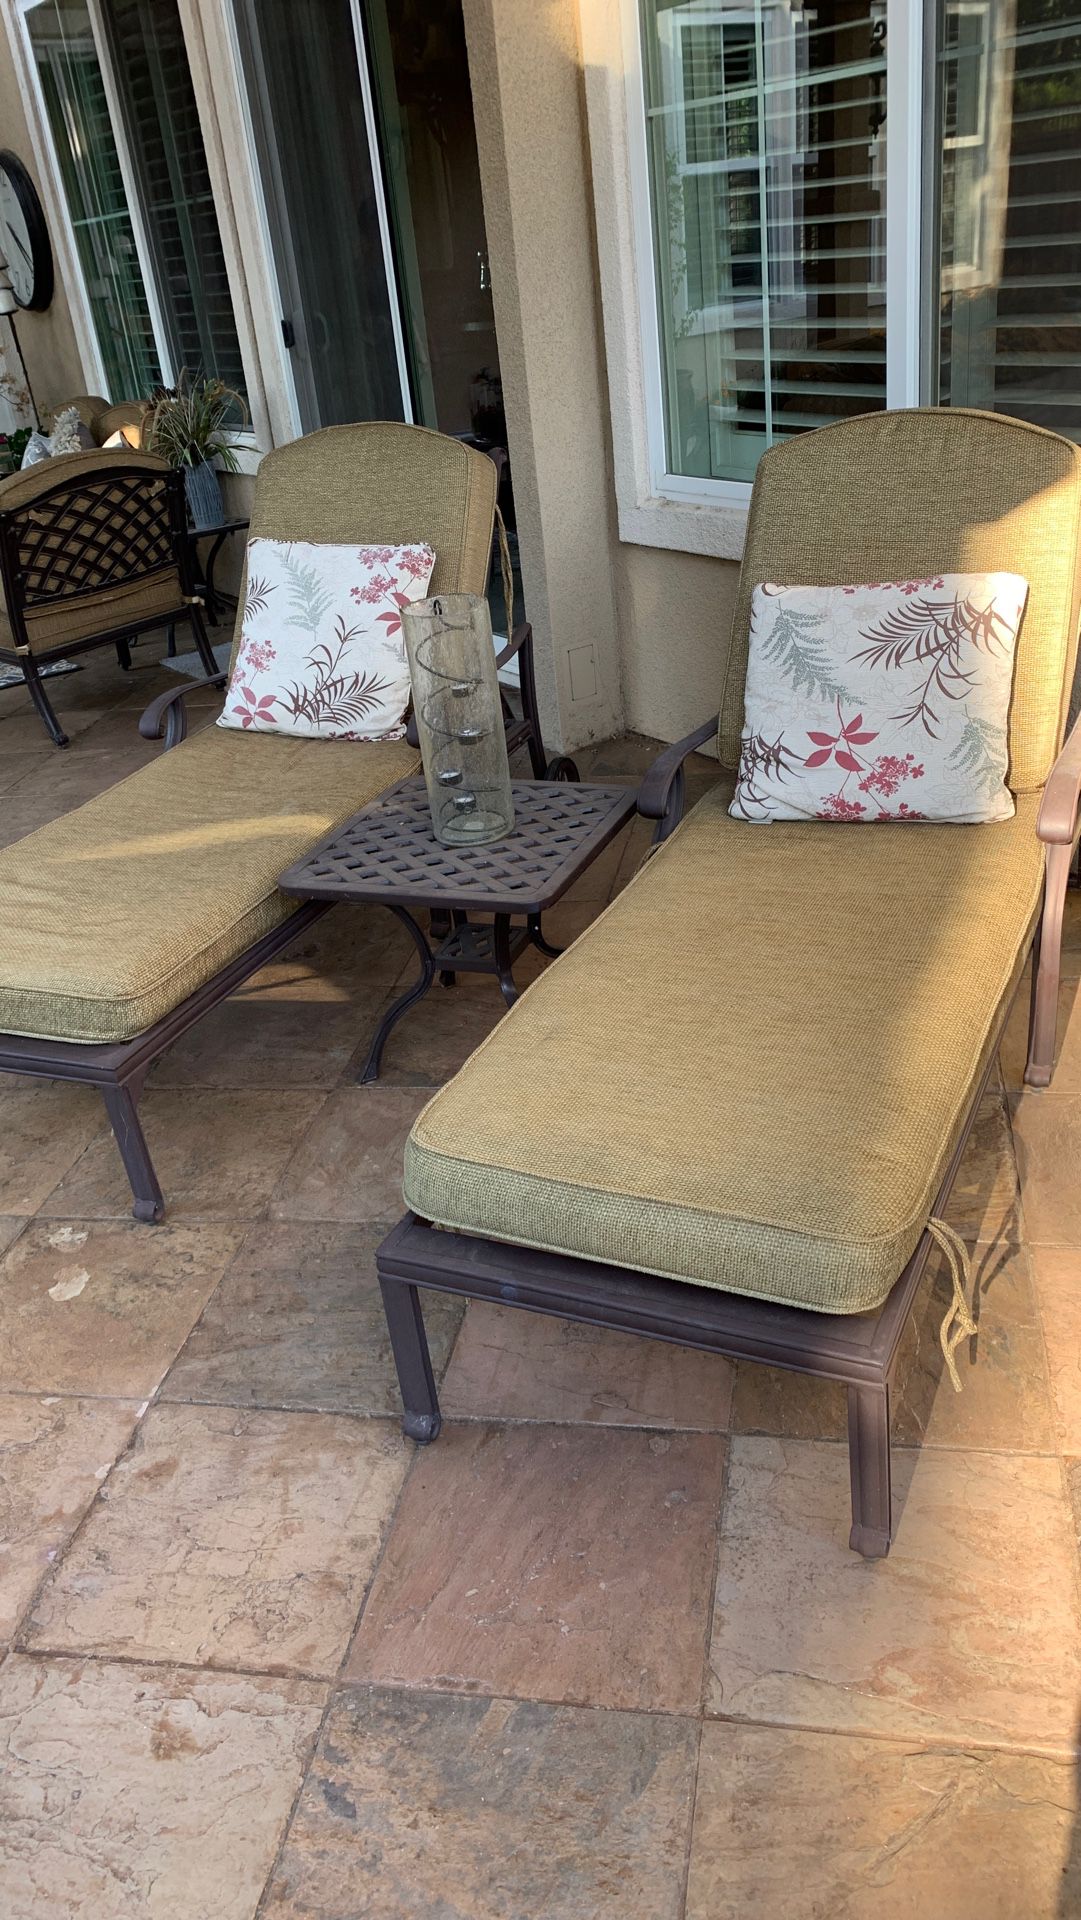 Chase Lounge patio recliner chairs